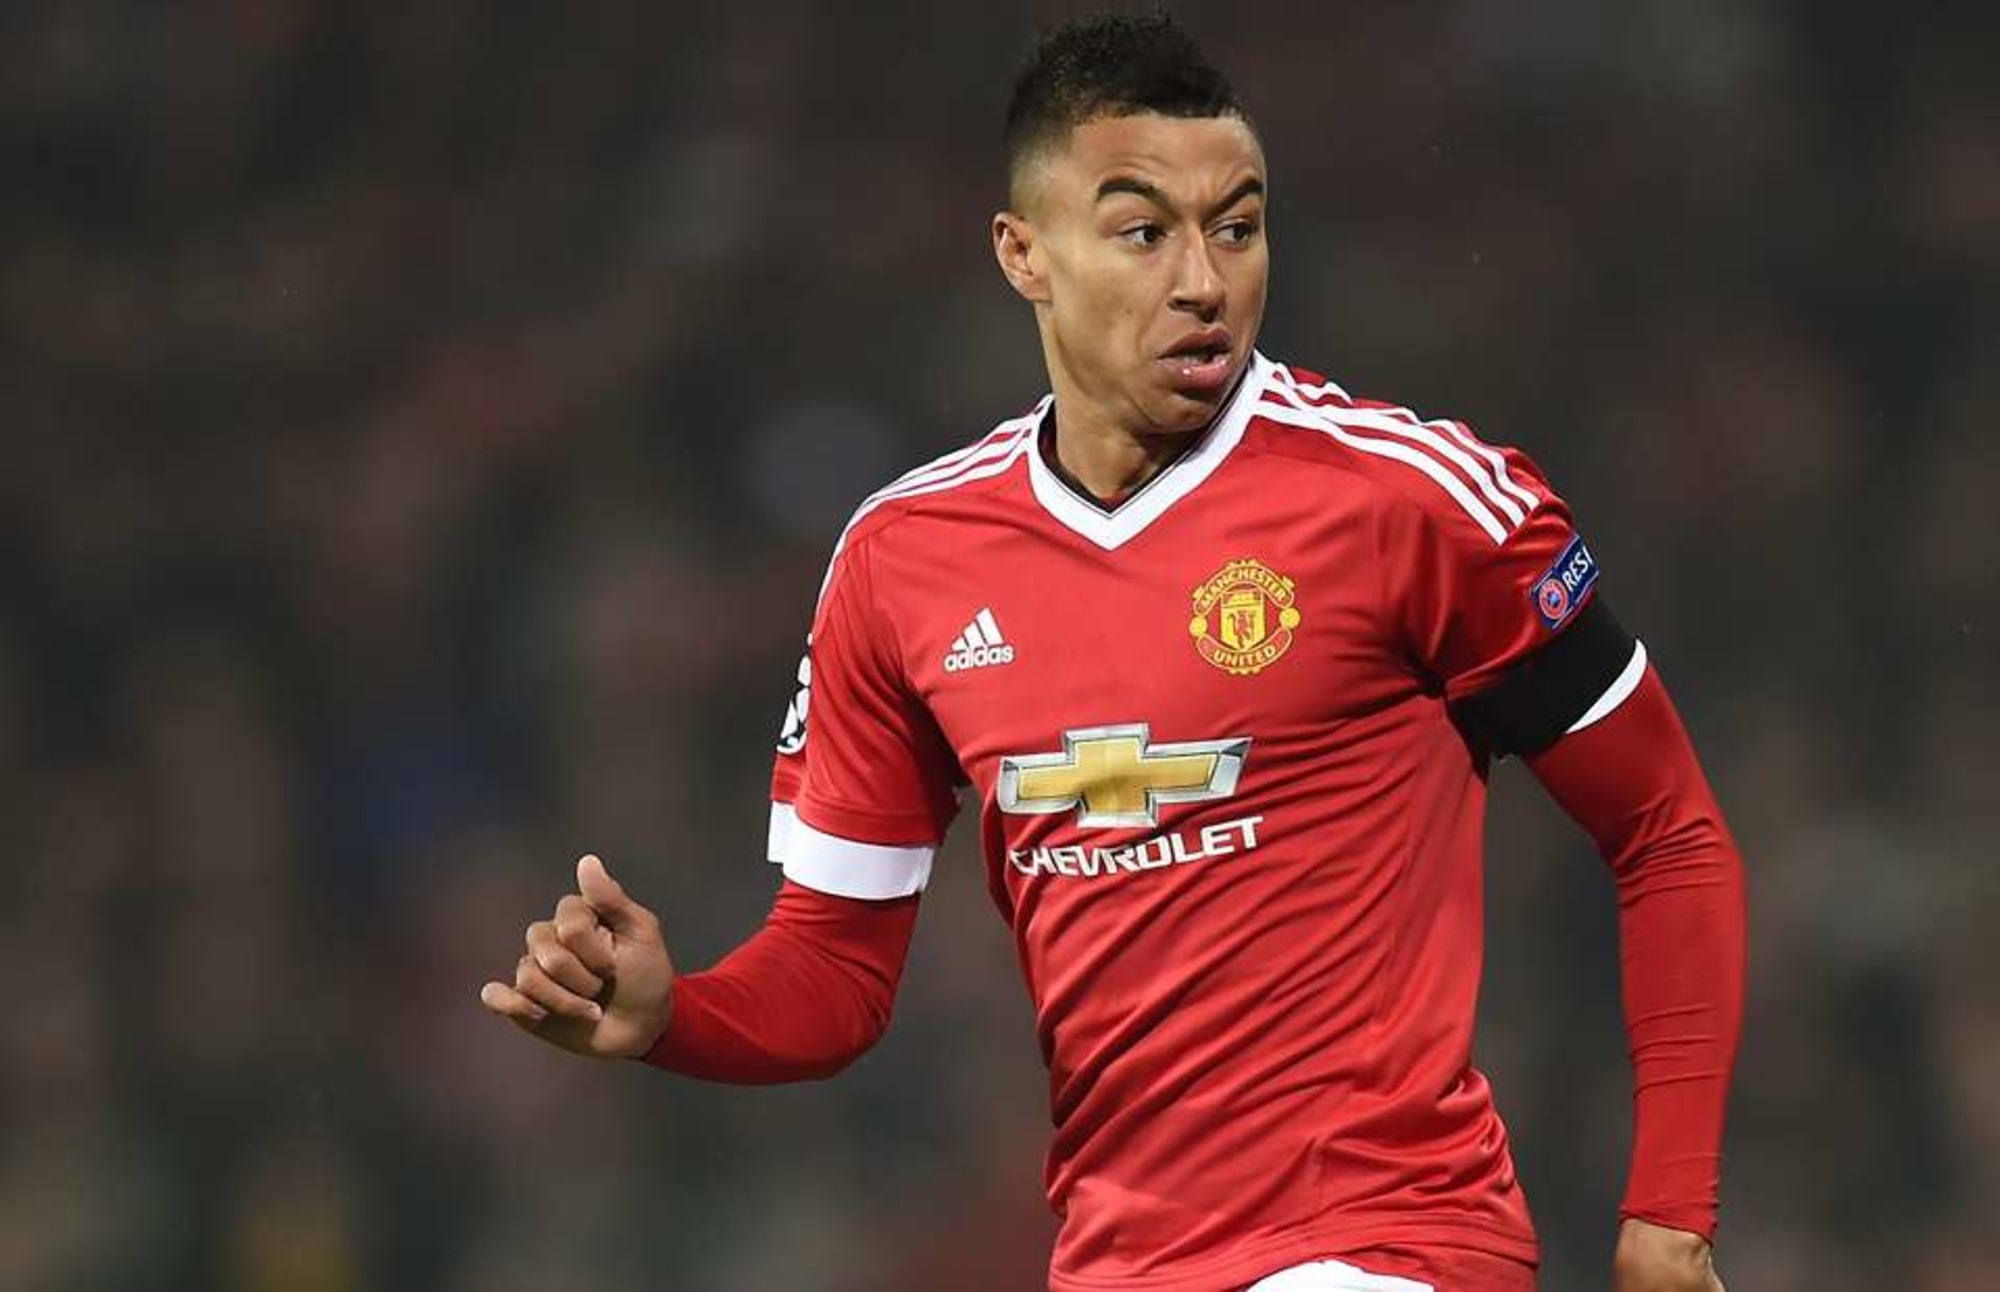 Manchester United's Jesse Lingard praised by academy coach